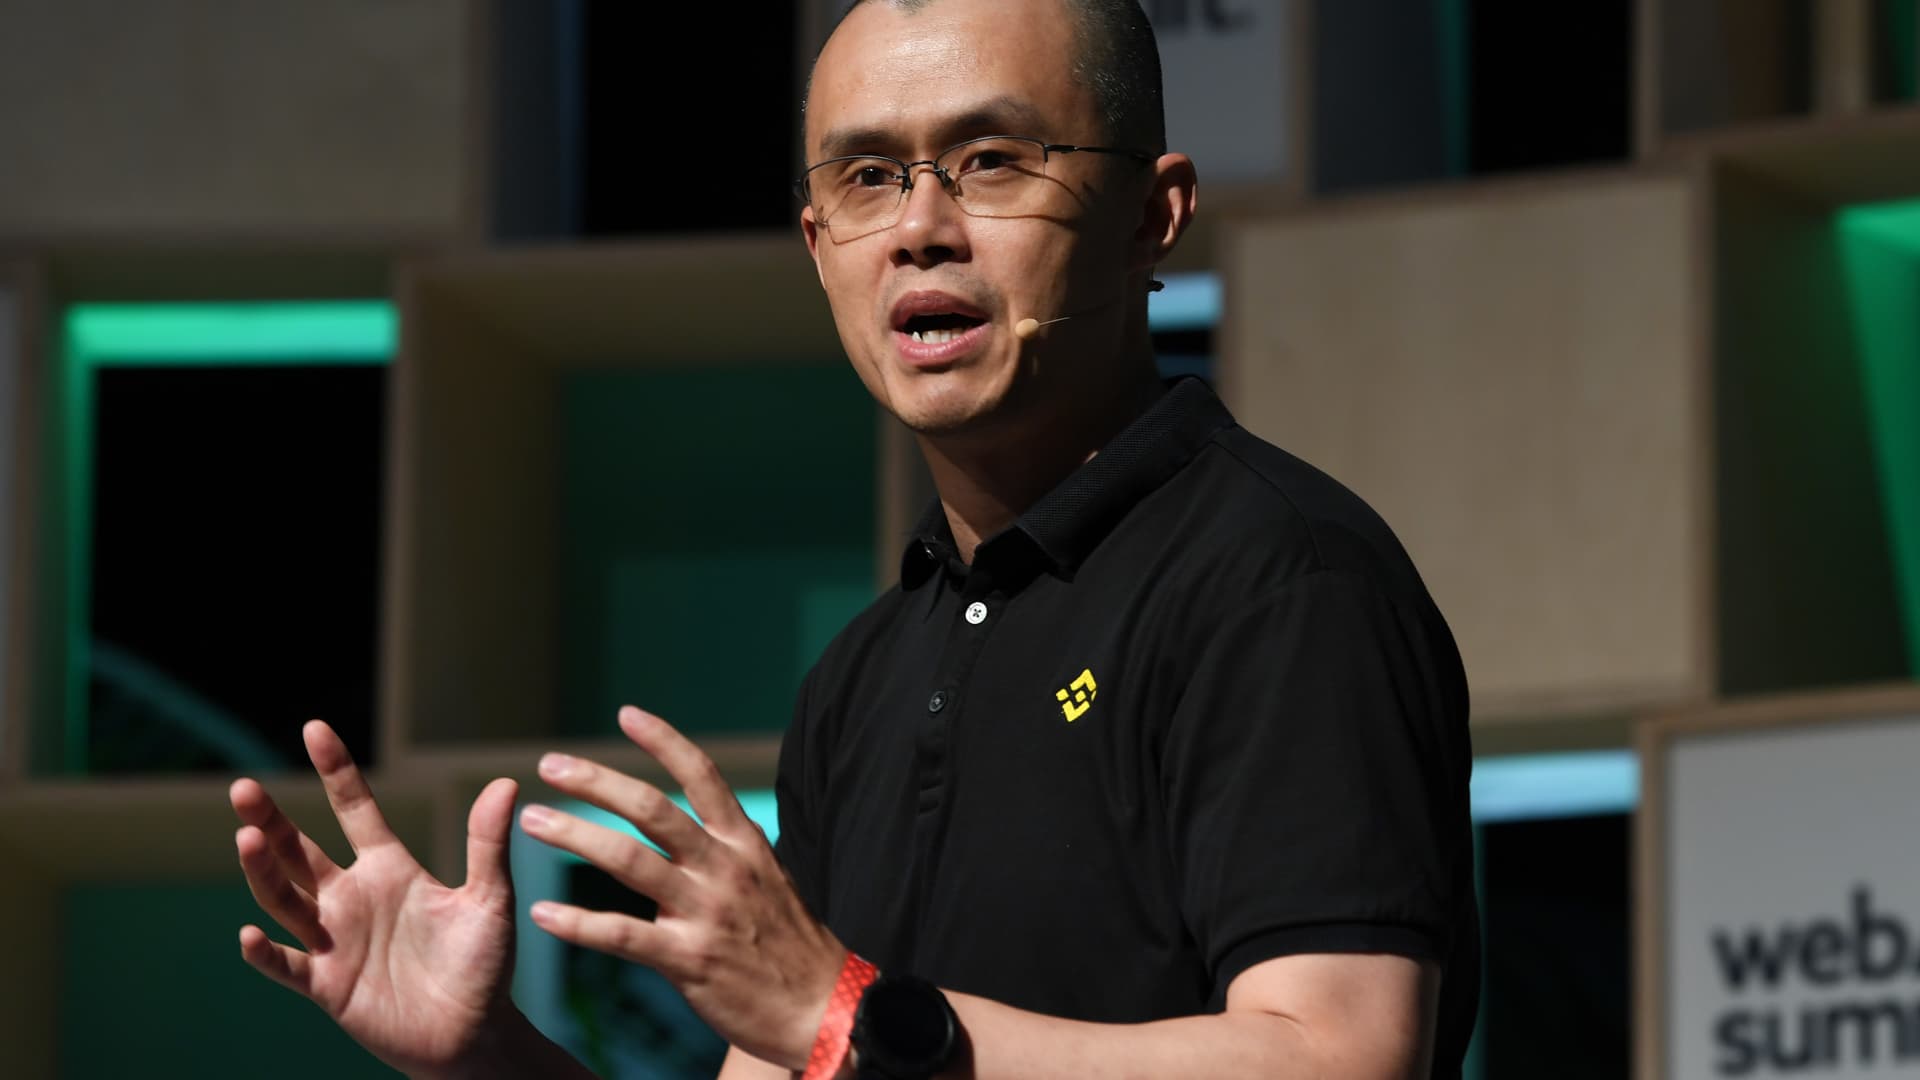 Binance is seeing a slight increase in withdrawals but otherwise it's 'business as usual,' CEO says